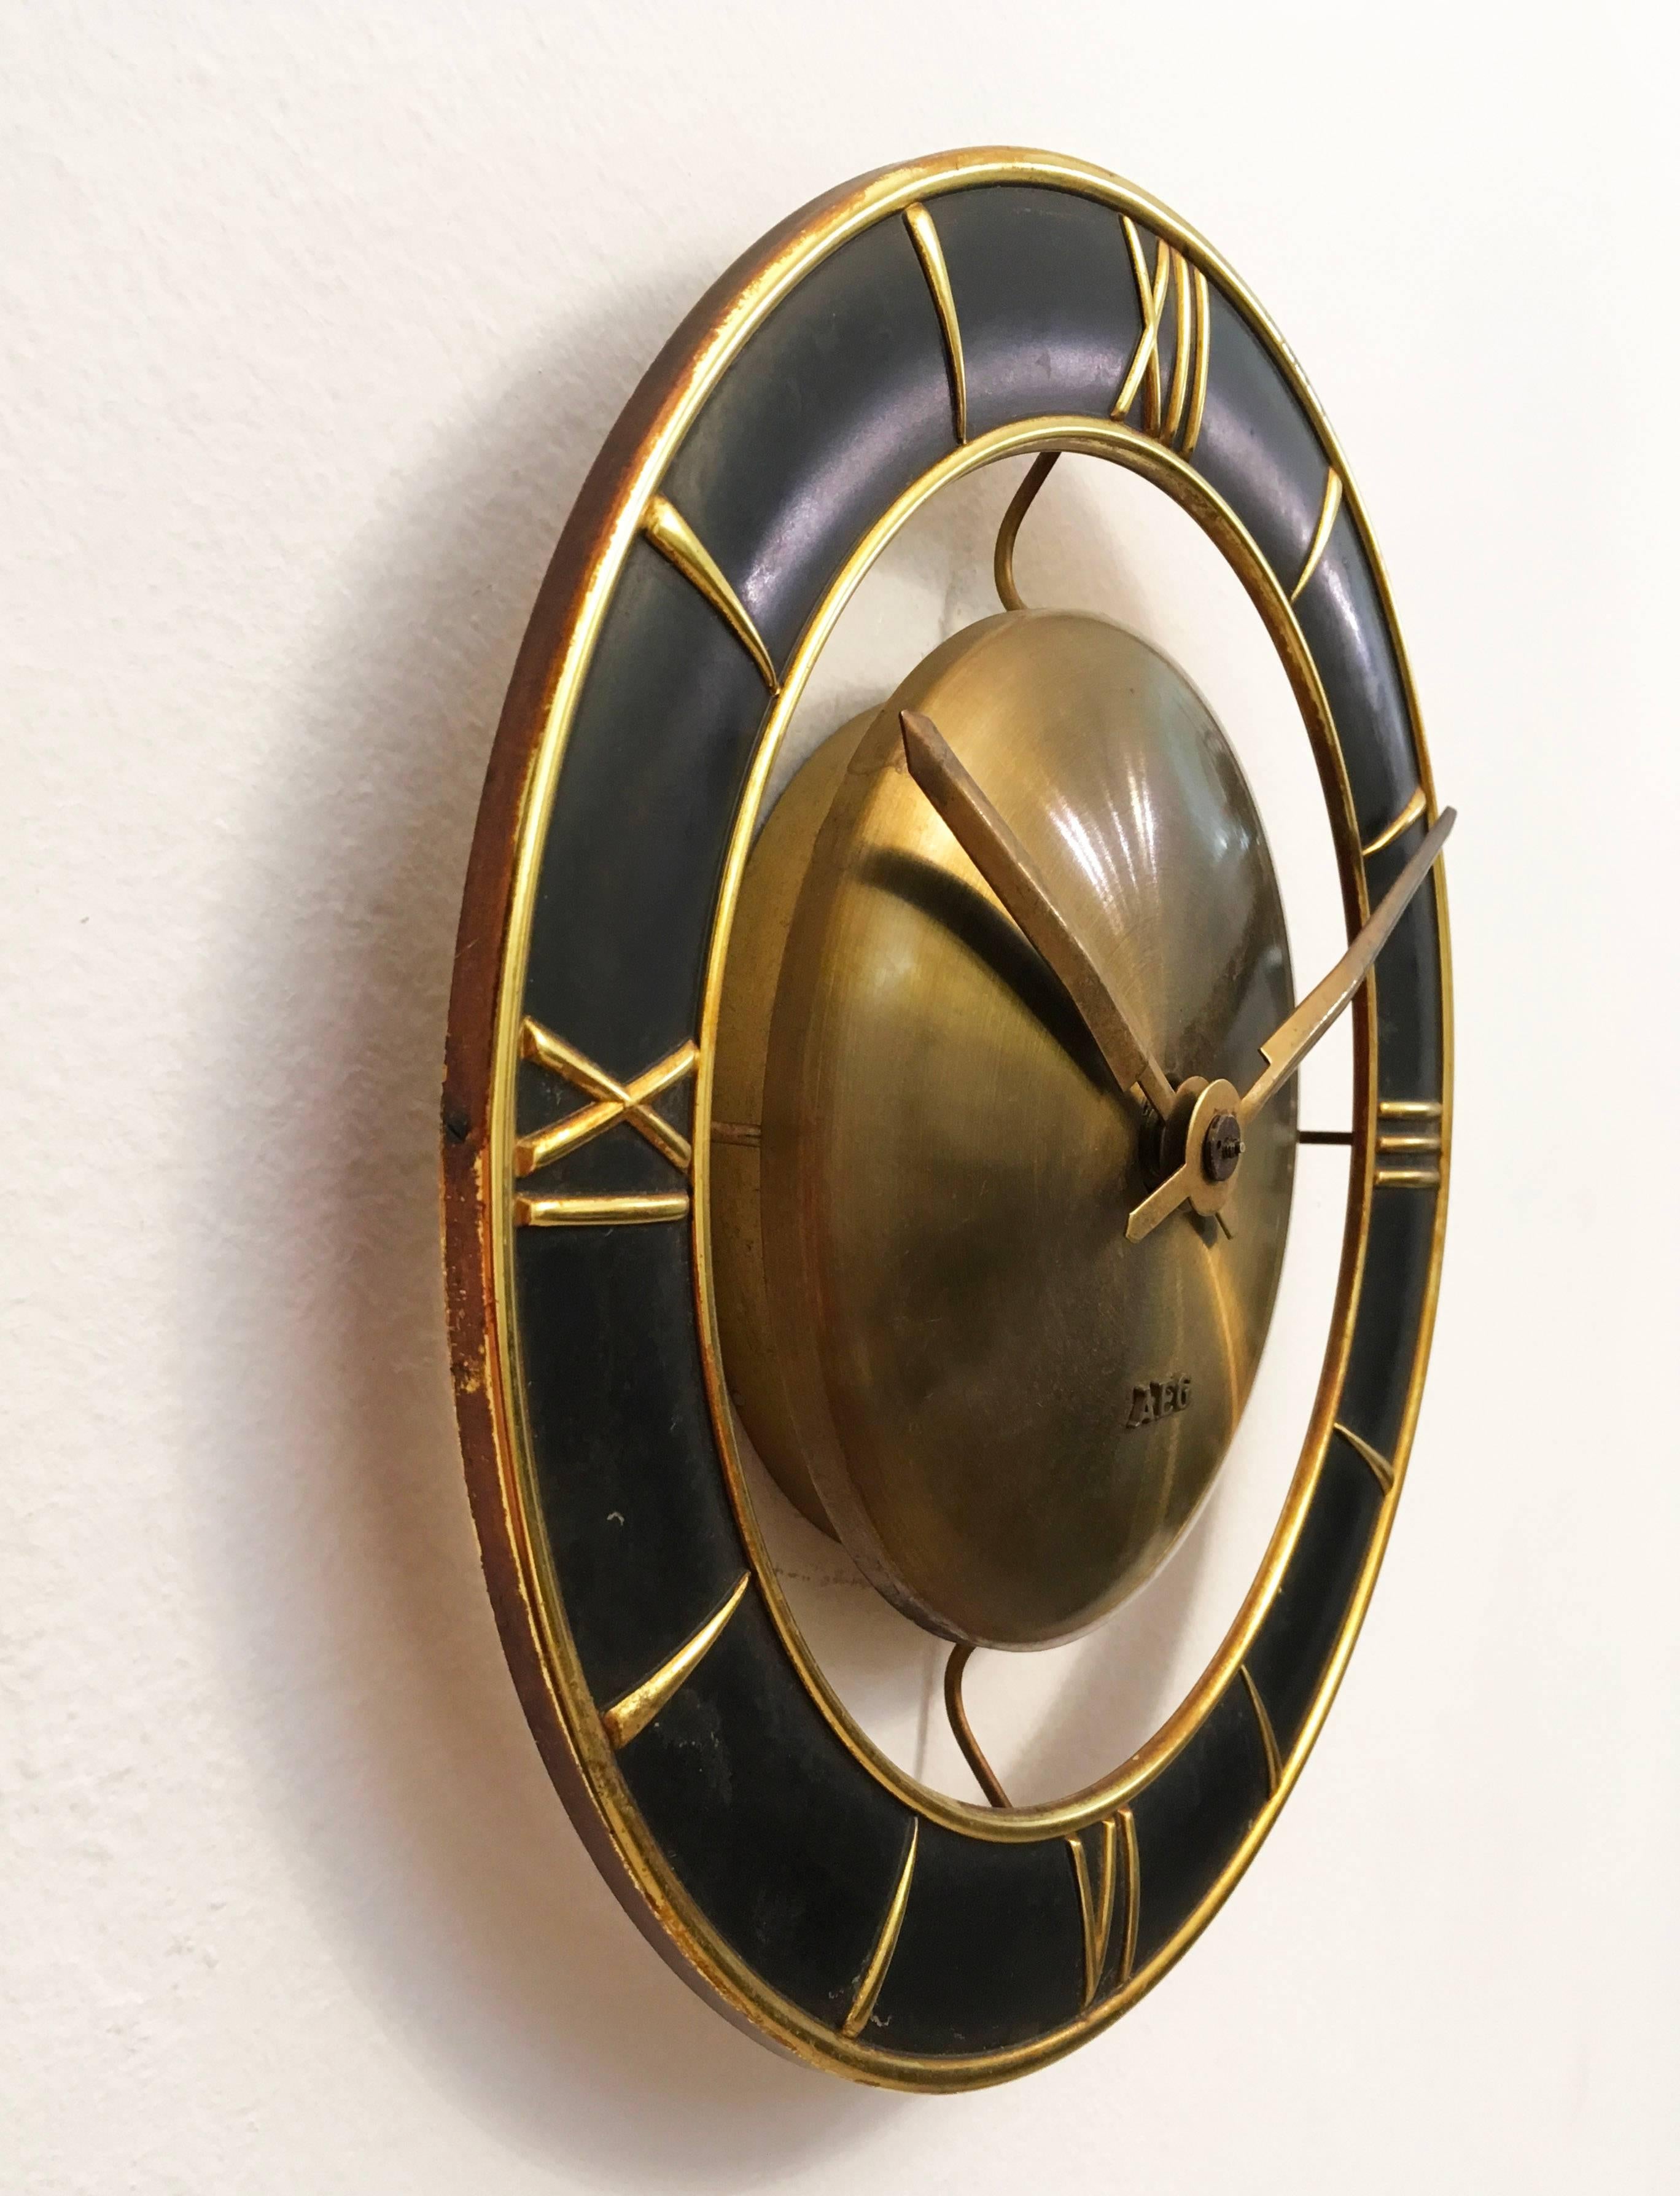 Brass body made in the late 1960s. Formerly a station or factory slave clock, it is now fitted with a modern quartz movement with a battery.
Delivery time 2-3 weeks.